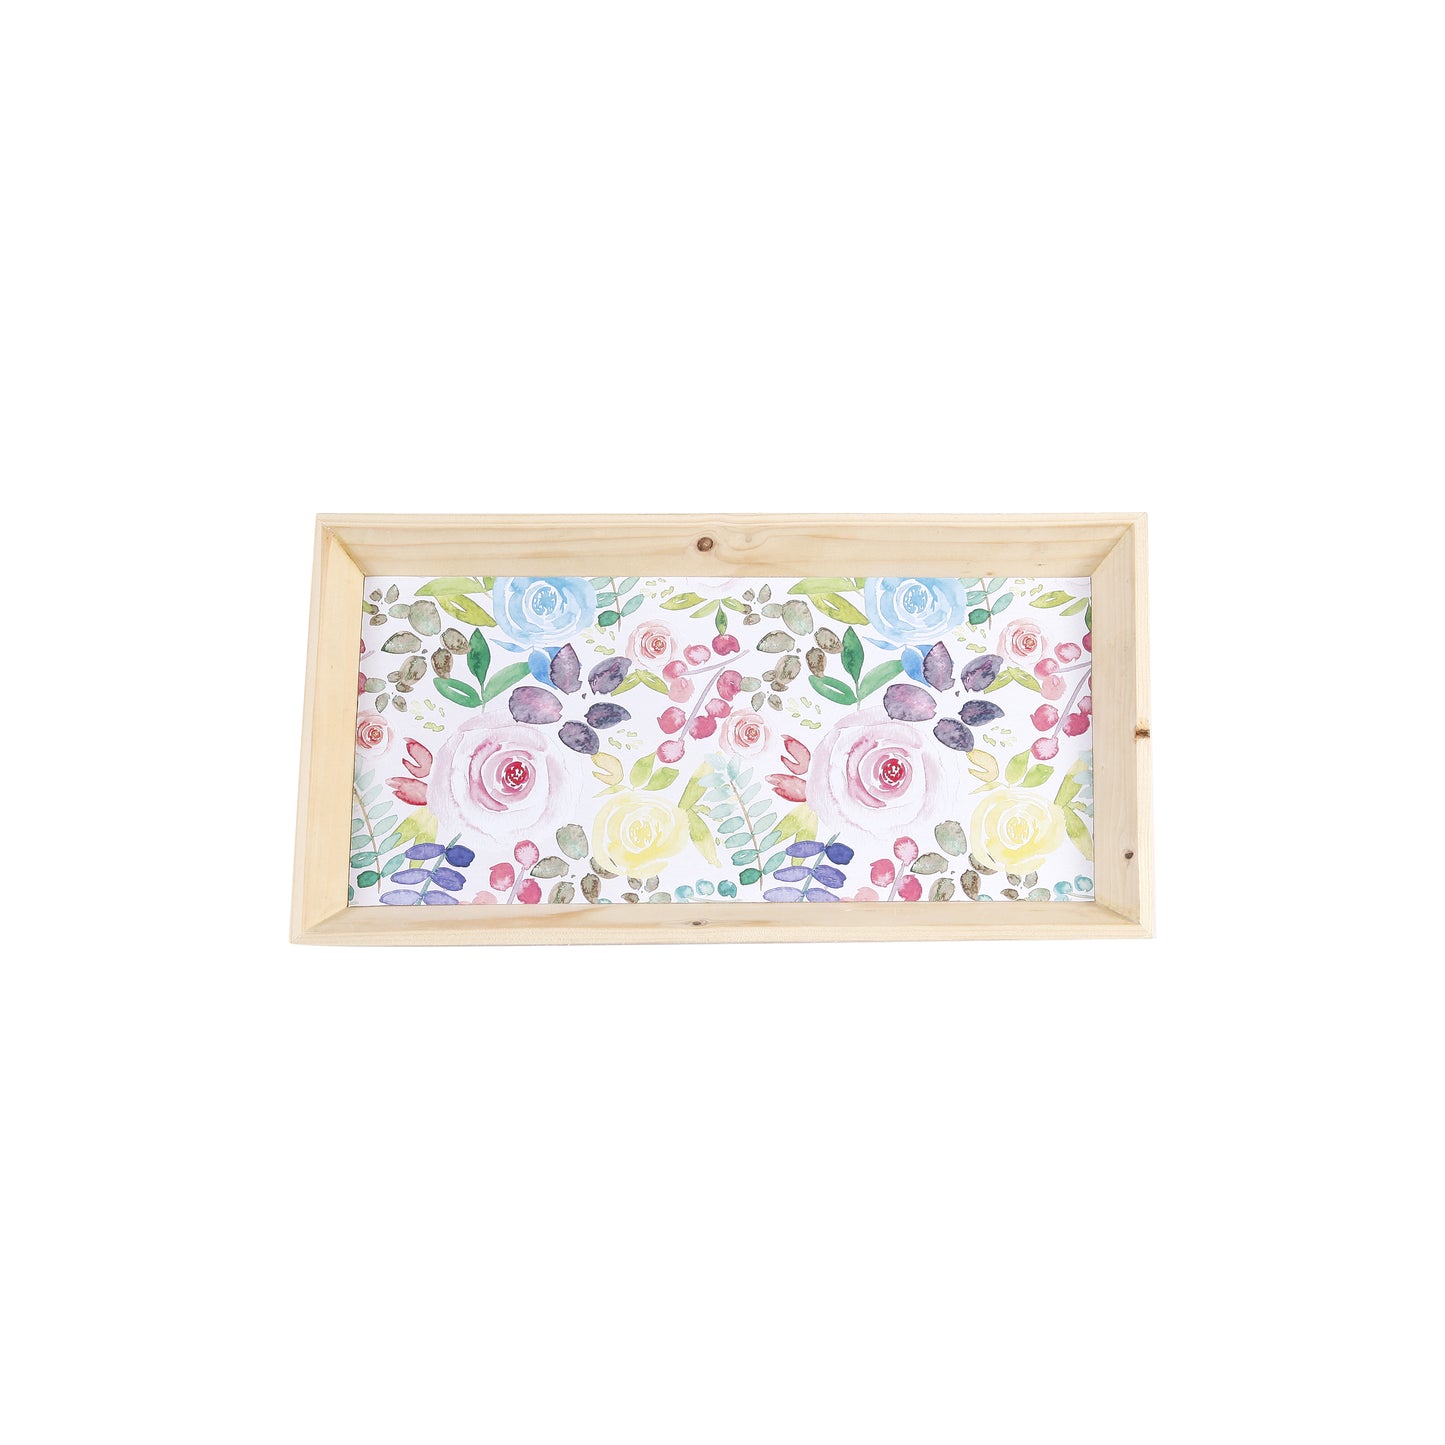 Tiny Mistake Geometric Watercolor Roses Wooden Serving Tray, 35 x 20 x 2 cm